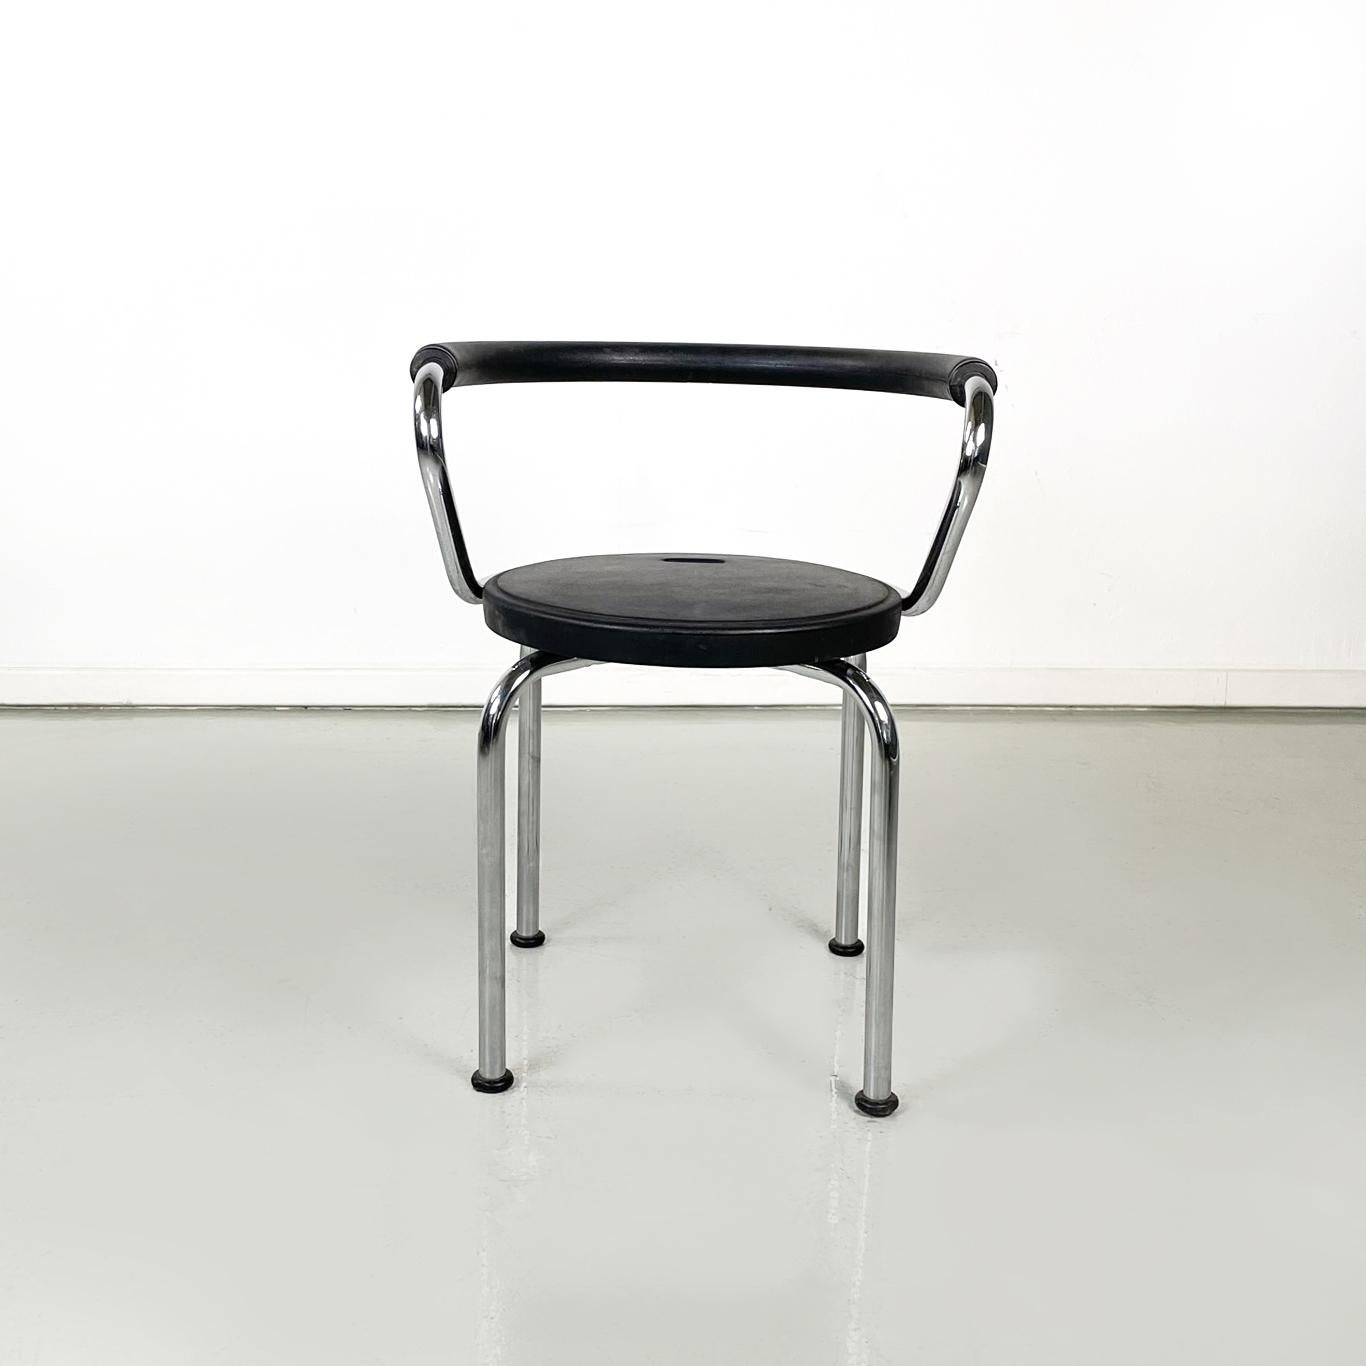 Italian modern Chairs in black rubber and metal by Airon, 1980s
Set of 4 chairs with round seat in black rubber. The backrest is in tubular metal, covered in black rubber. At the base of the chair it has tubular metal legs with round black rubber